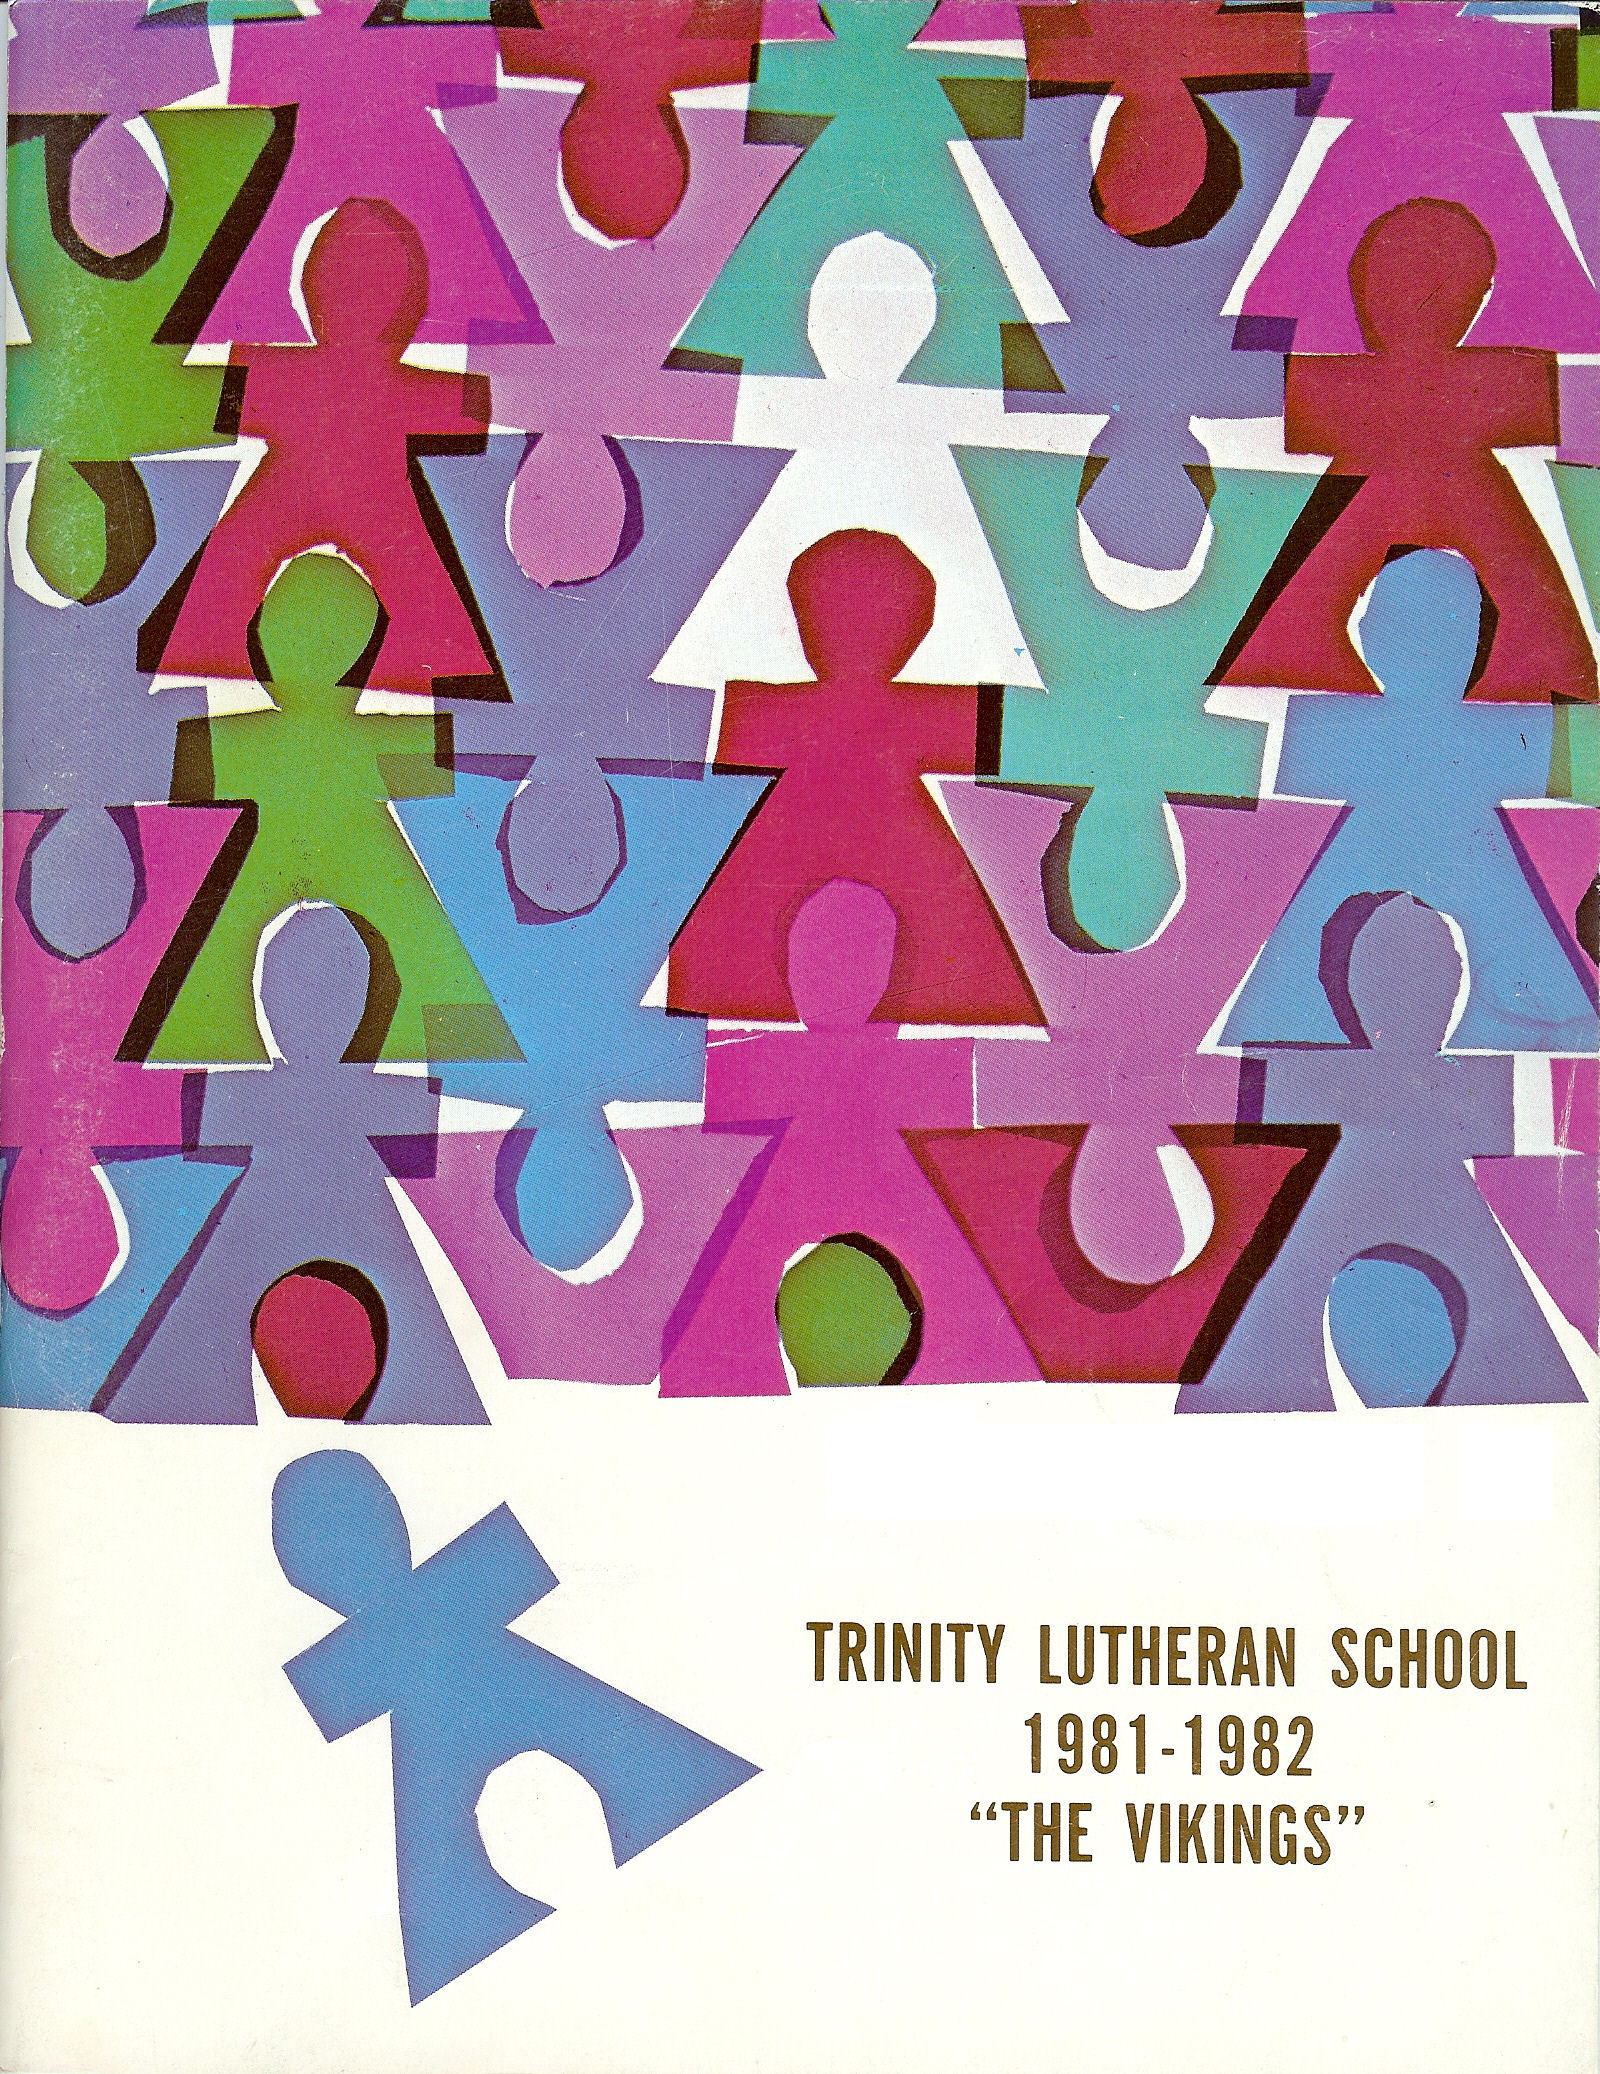 81-82 Yearbook Cover